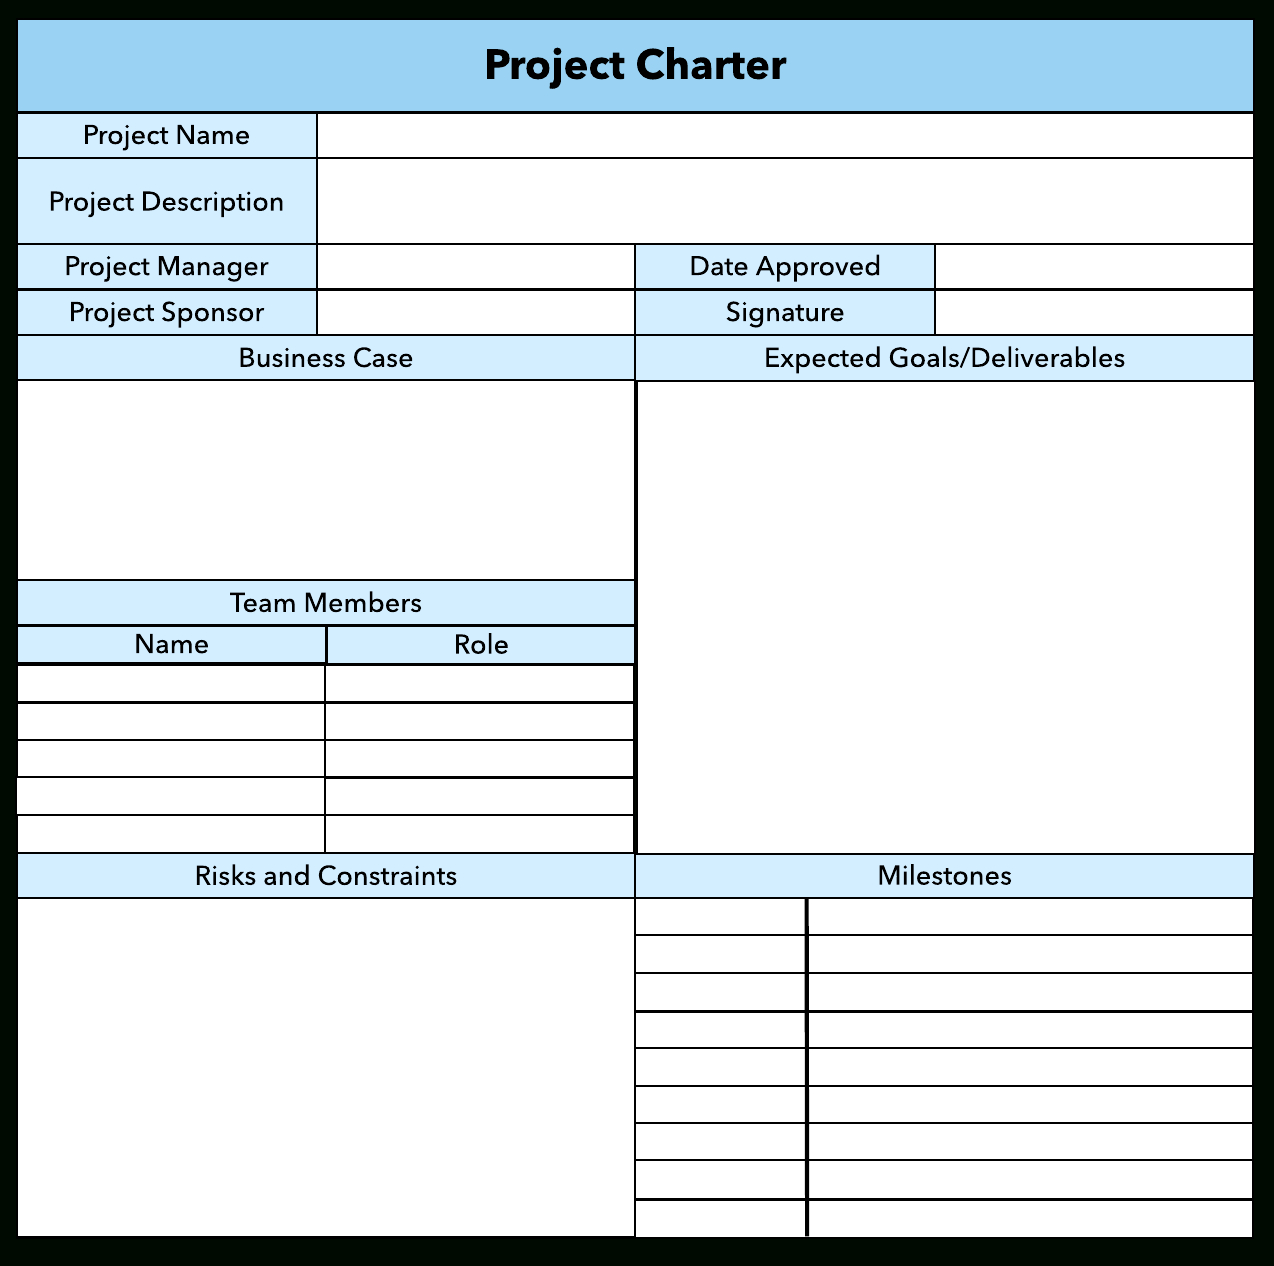 10 Steps To Create A Project Plan | Project Management throughout Project Management Charter Templates